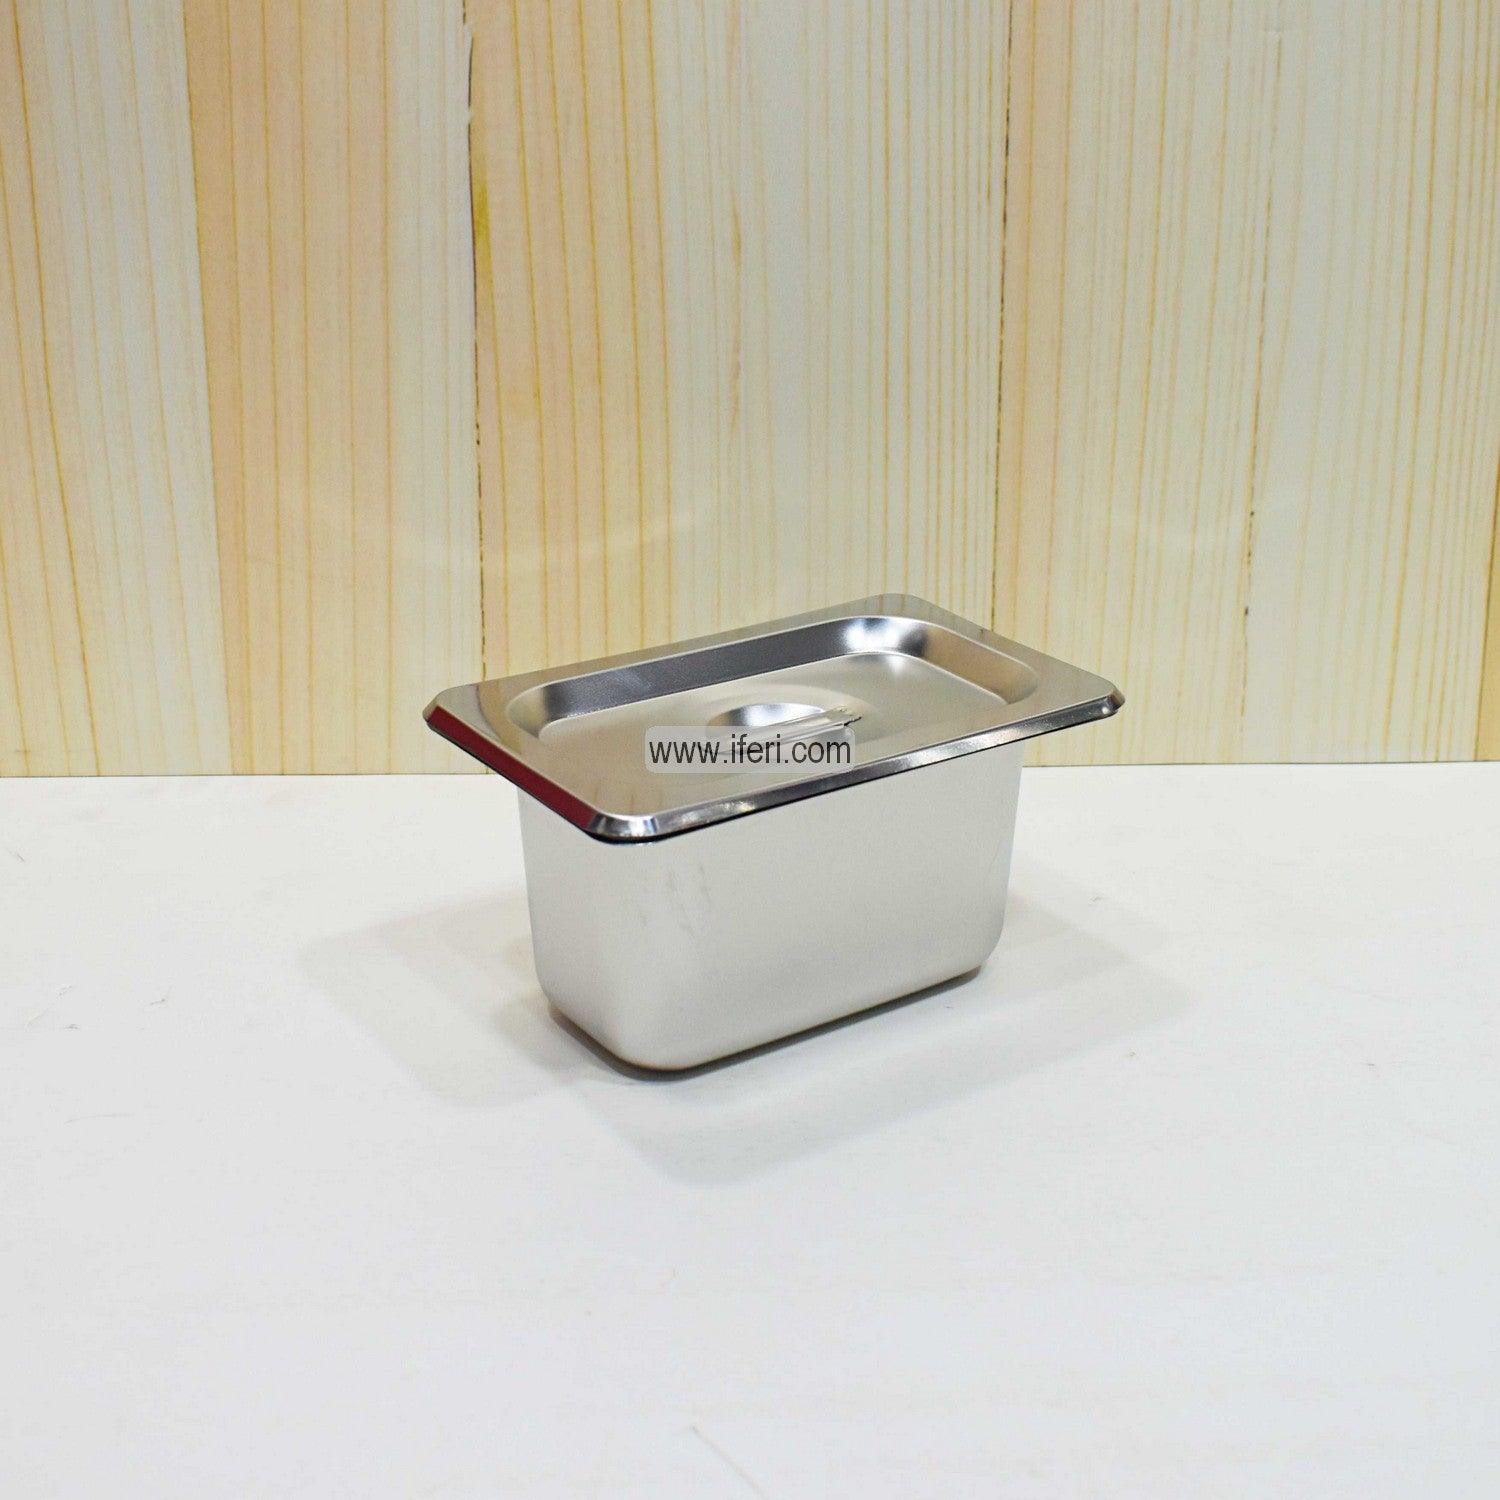 6.8 Inch Stainless Steel Food Pan with Lid SN0575 Price in Bangladesh - iferi.com